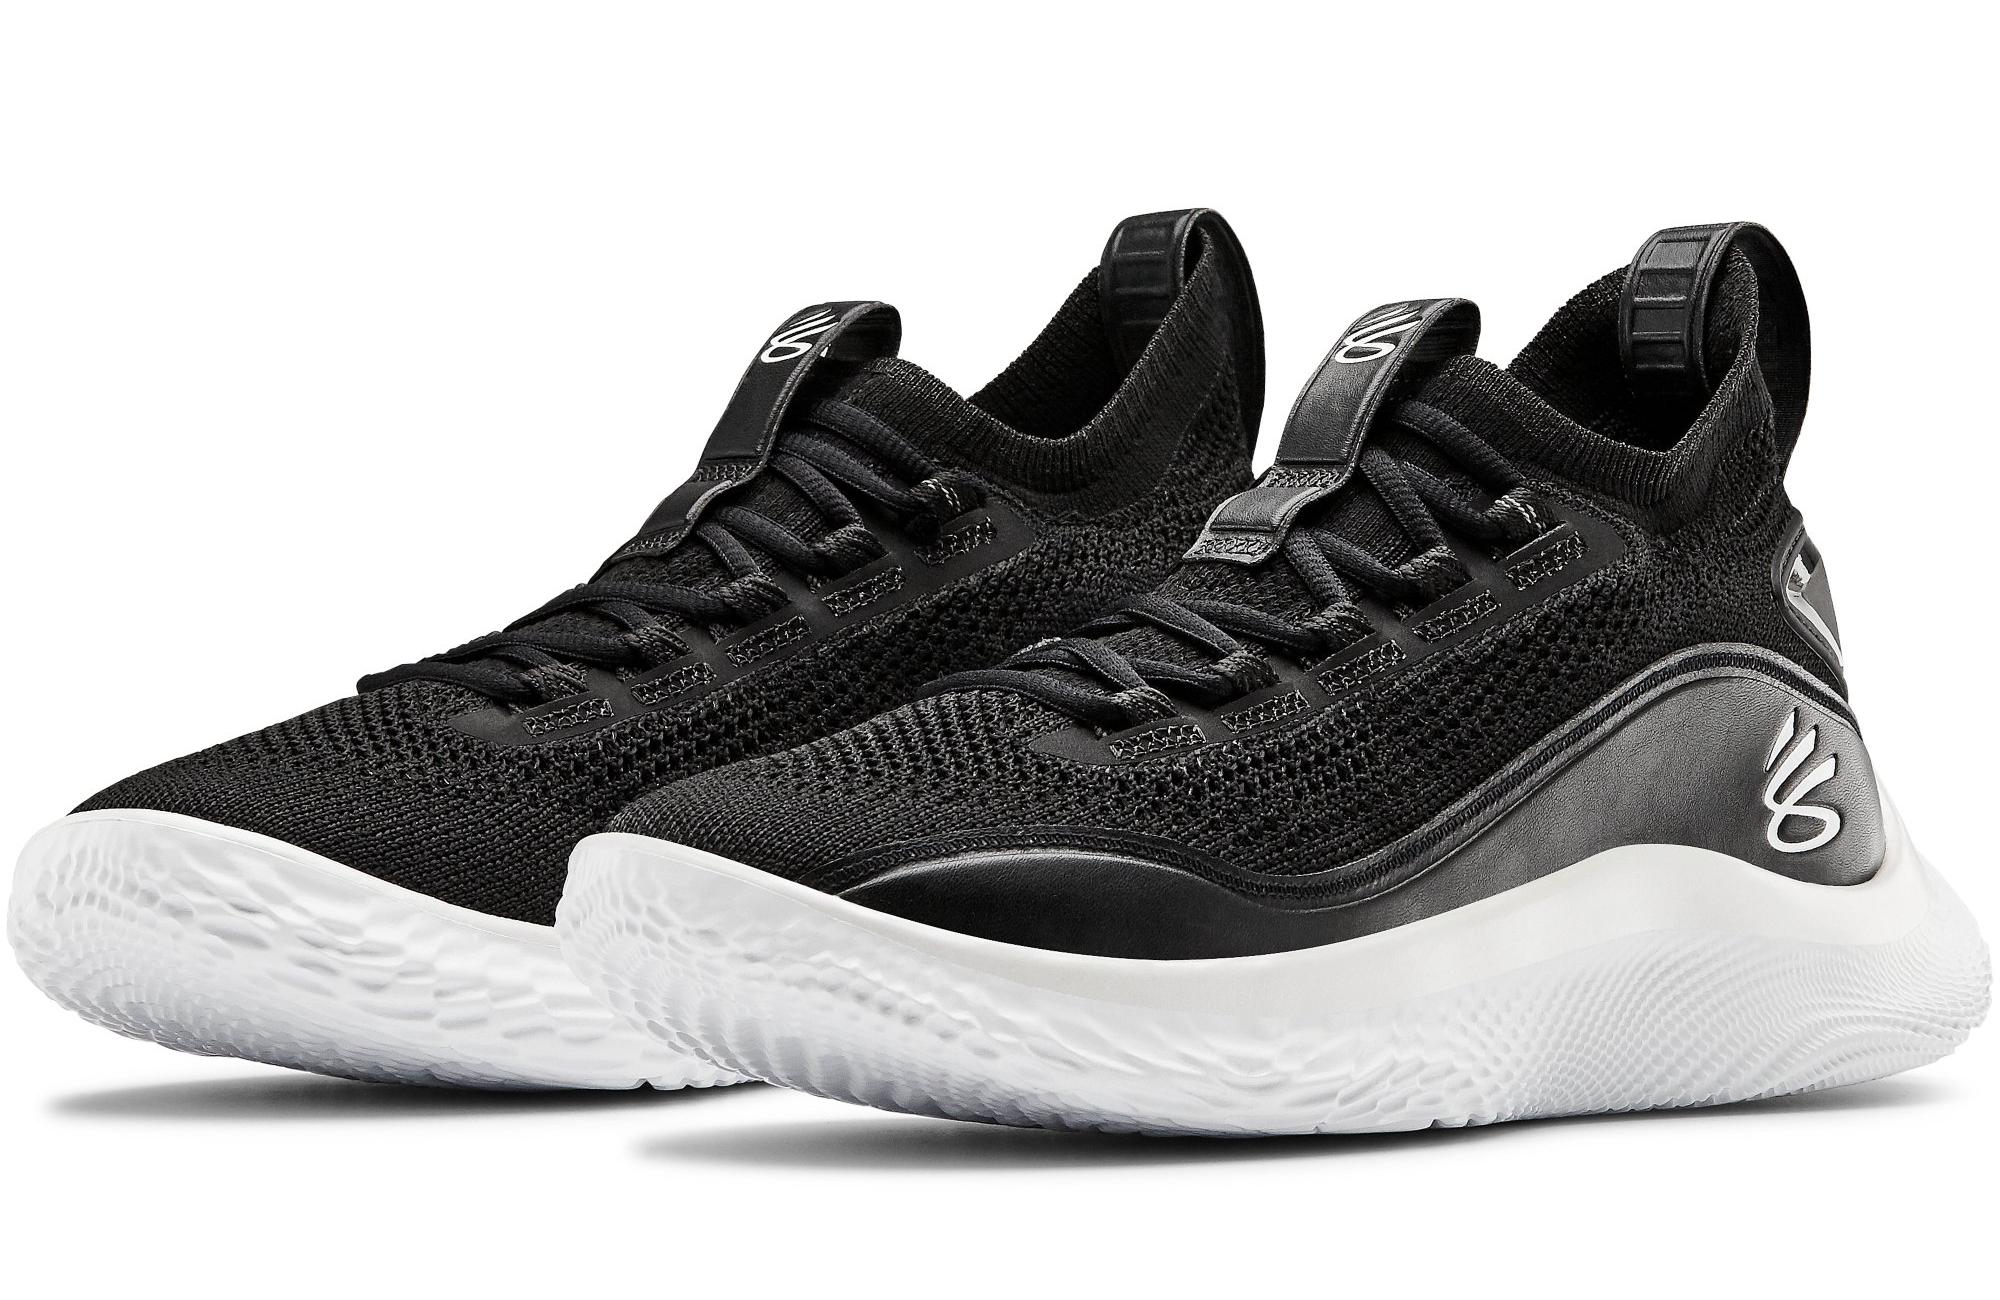 Sneakers Release- Under Armour Curry Flow 8 “Silent Night” Launching ...